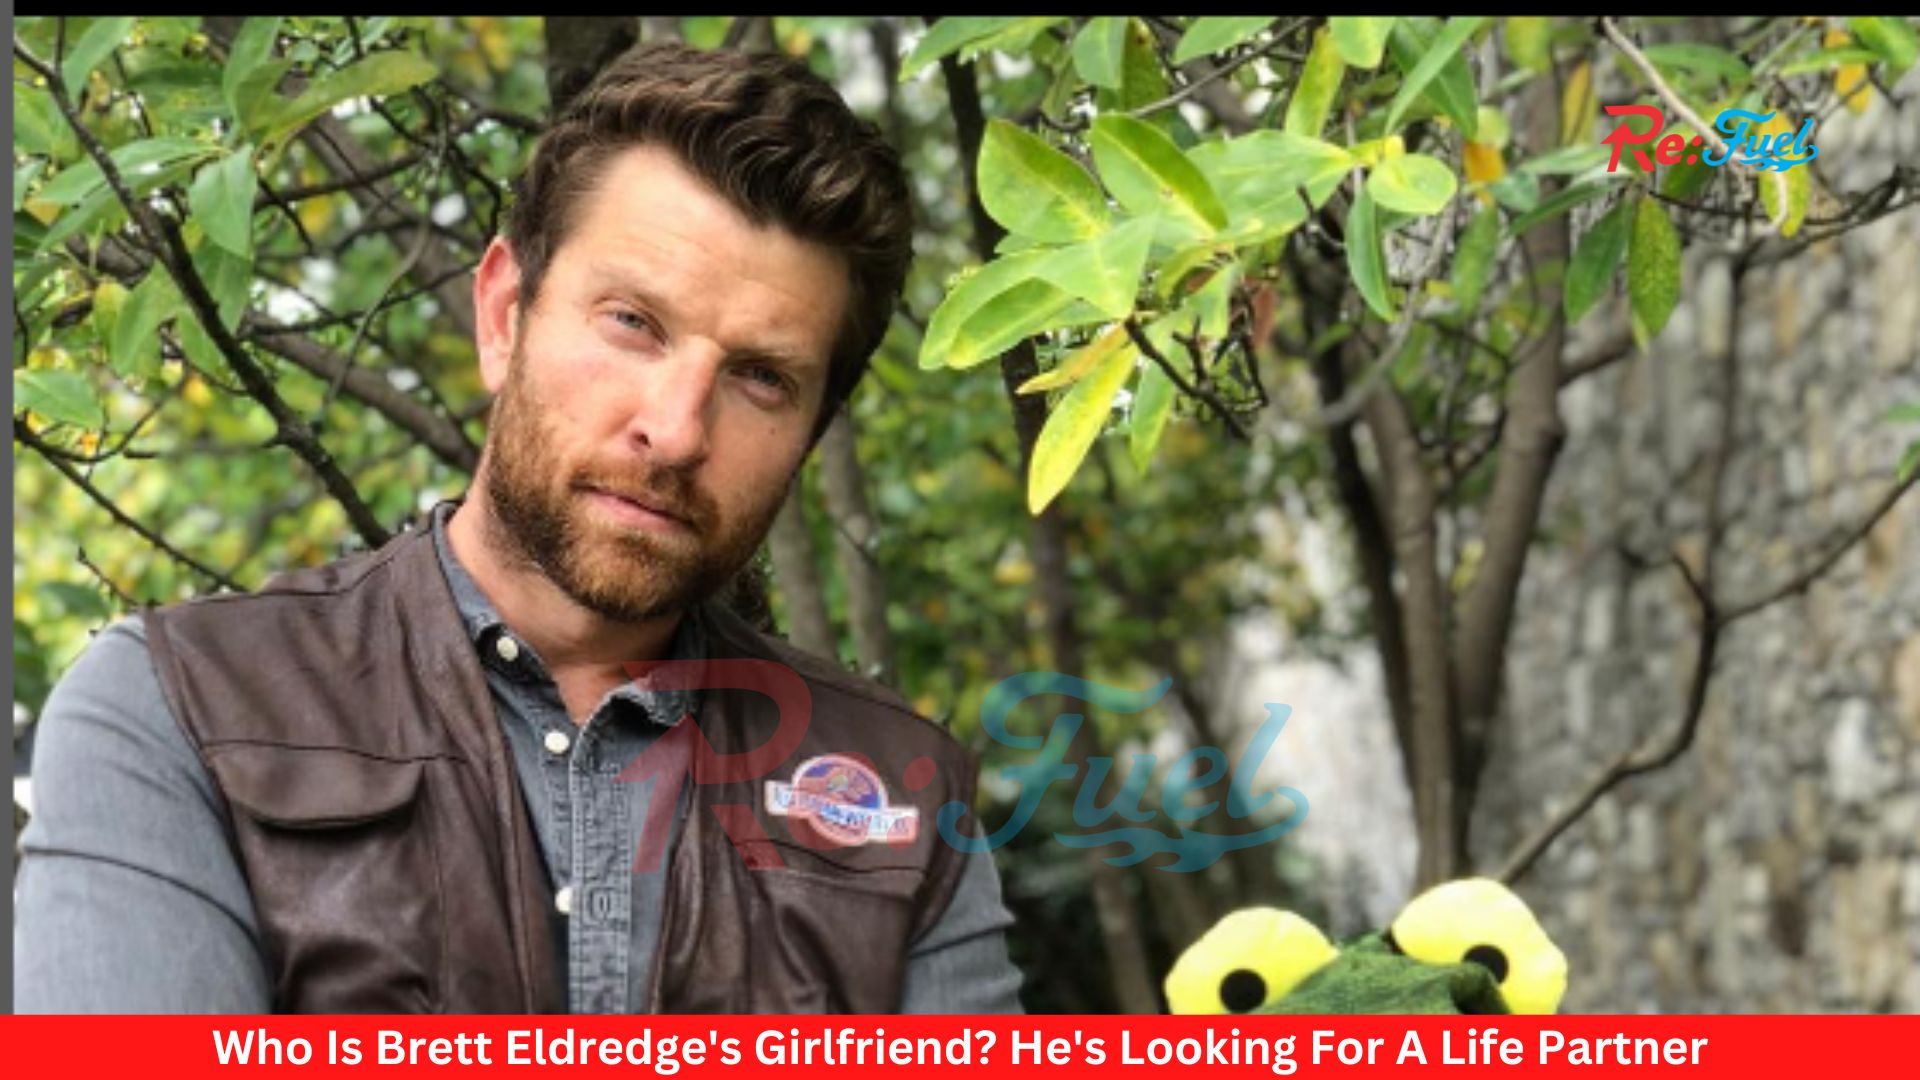 Who Is Brett Eldredge's Girlfriend? He's Looking For A Life Partner